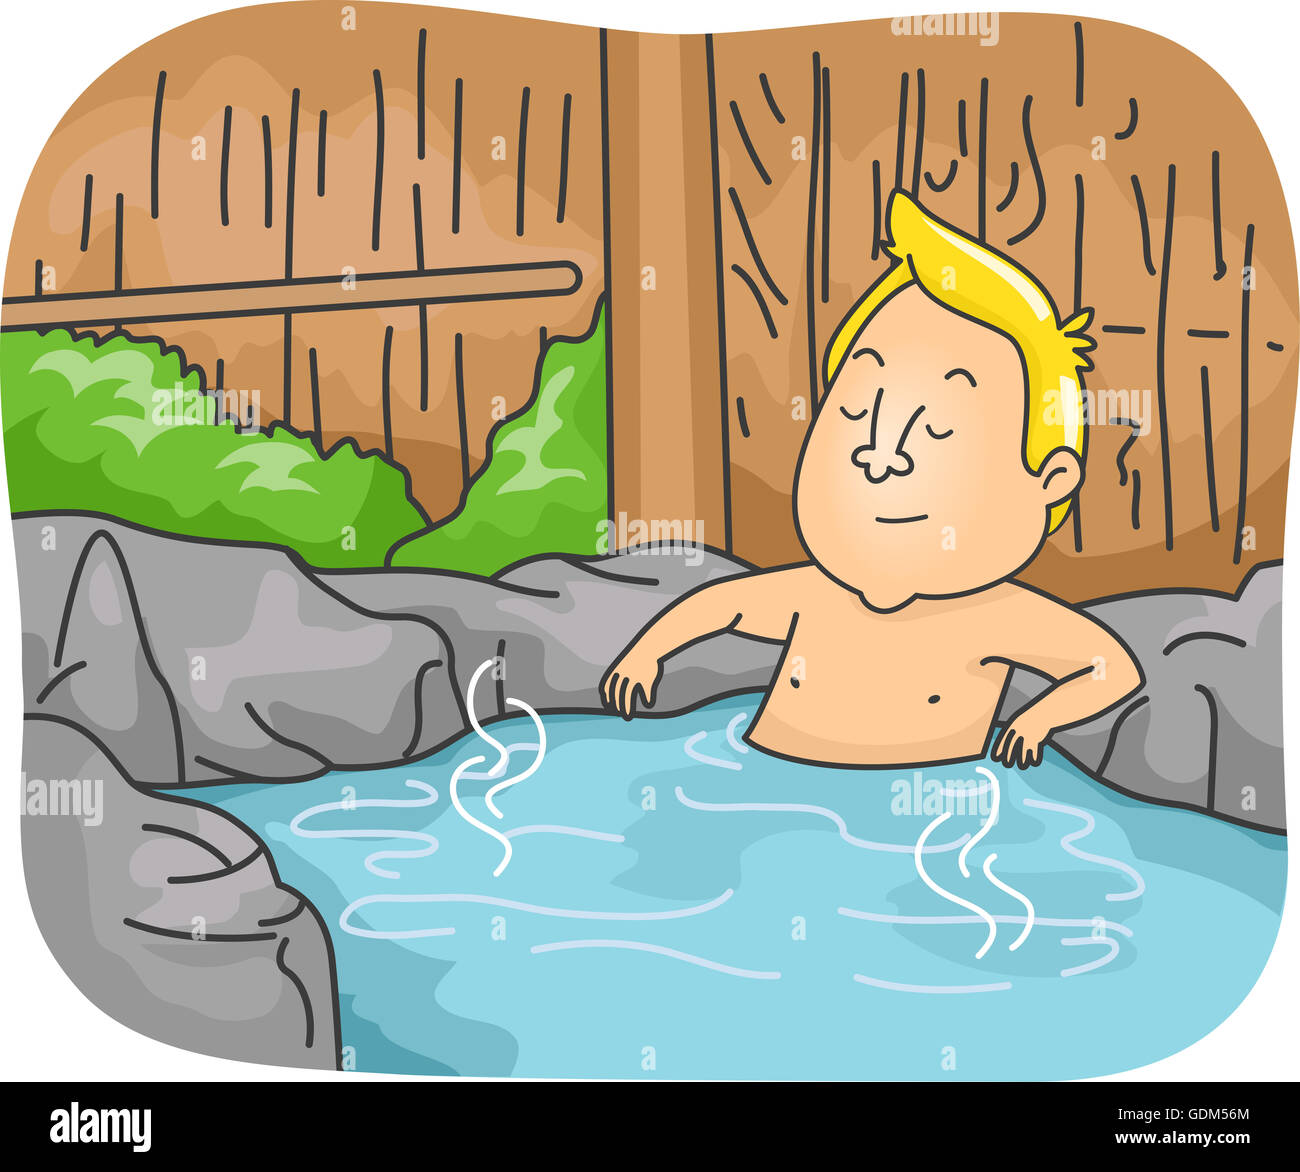 Illustration of a Man Having a Relaxing Time While Soaking in a Hot Spring Stock Photo